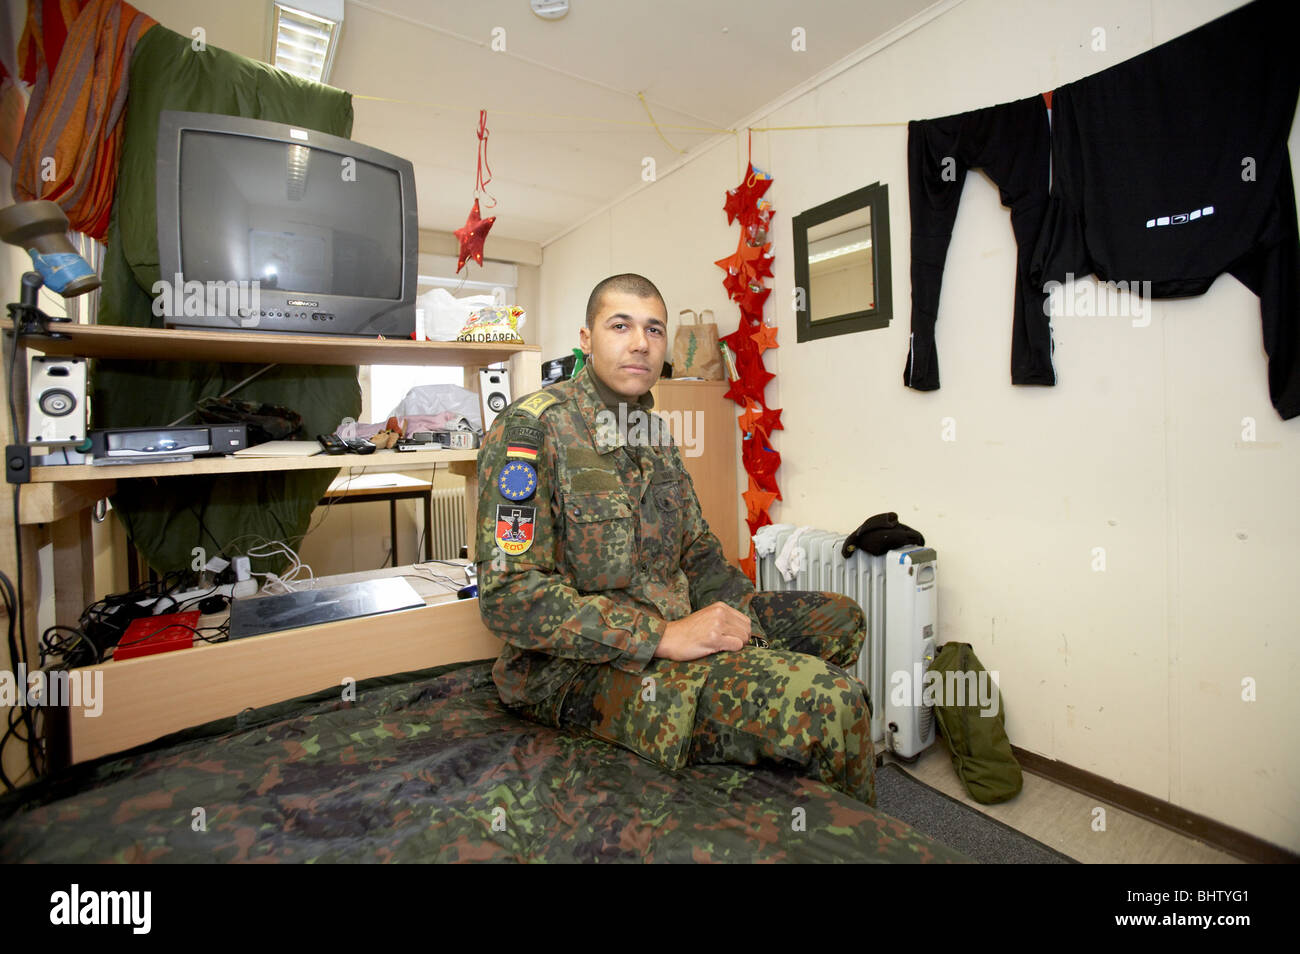 Soldier on assignment abroad, Sarajevo, Bosnia and Herzegovina Stock Photo